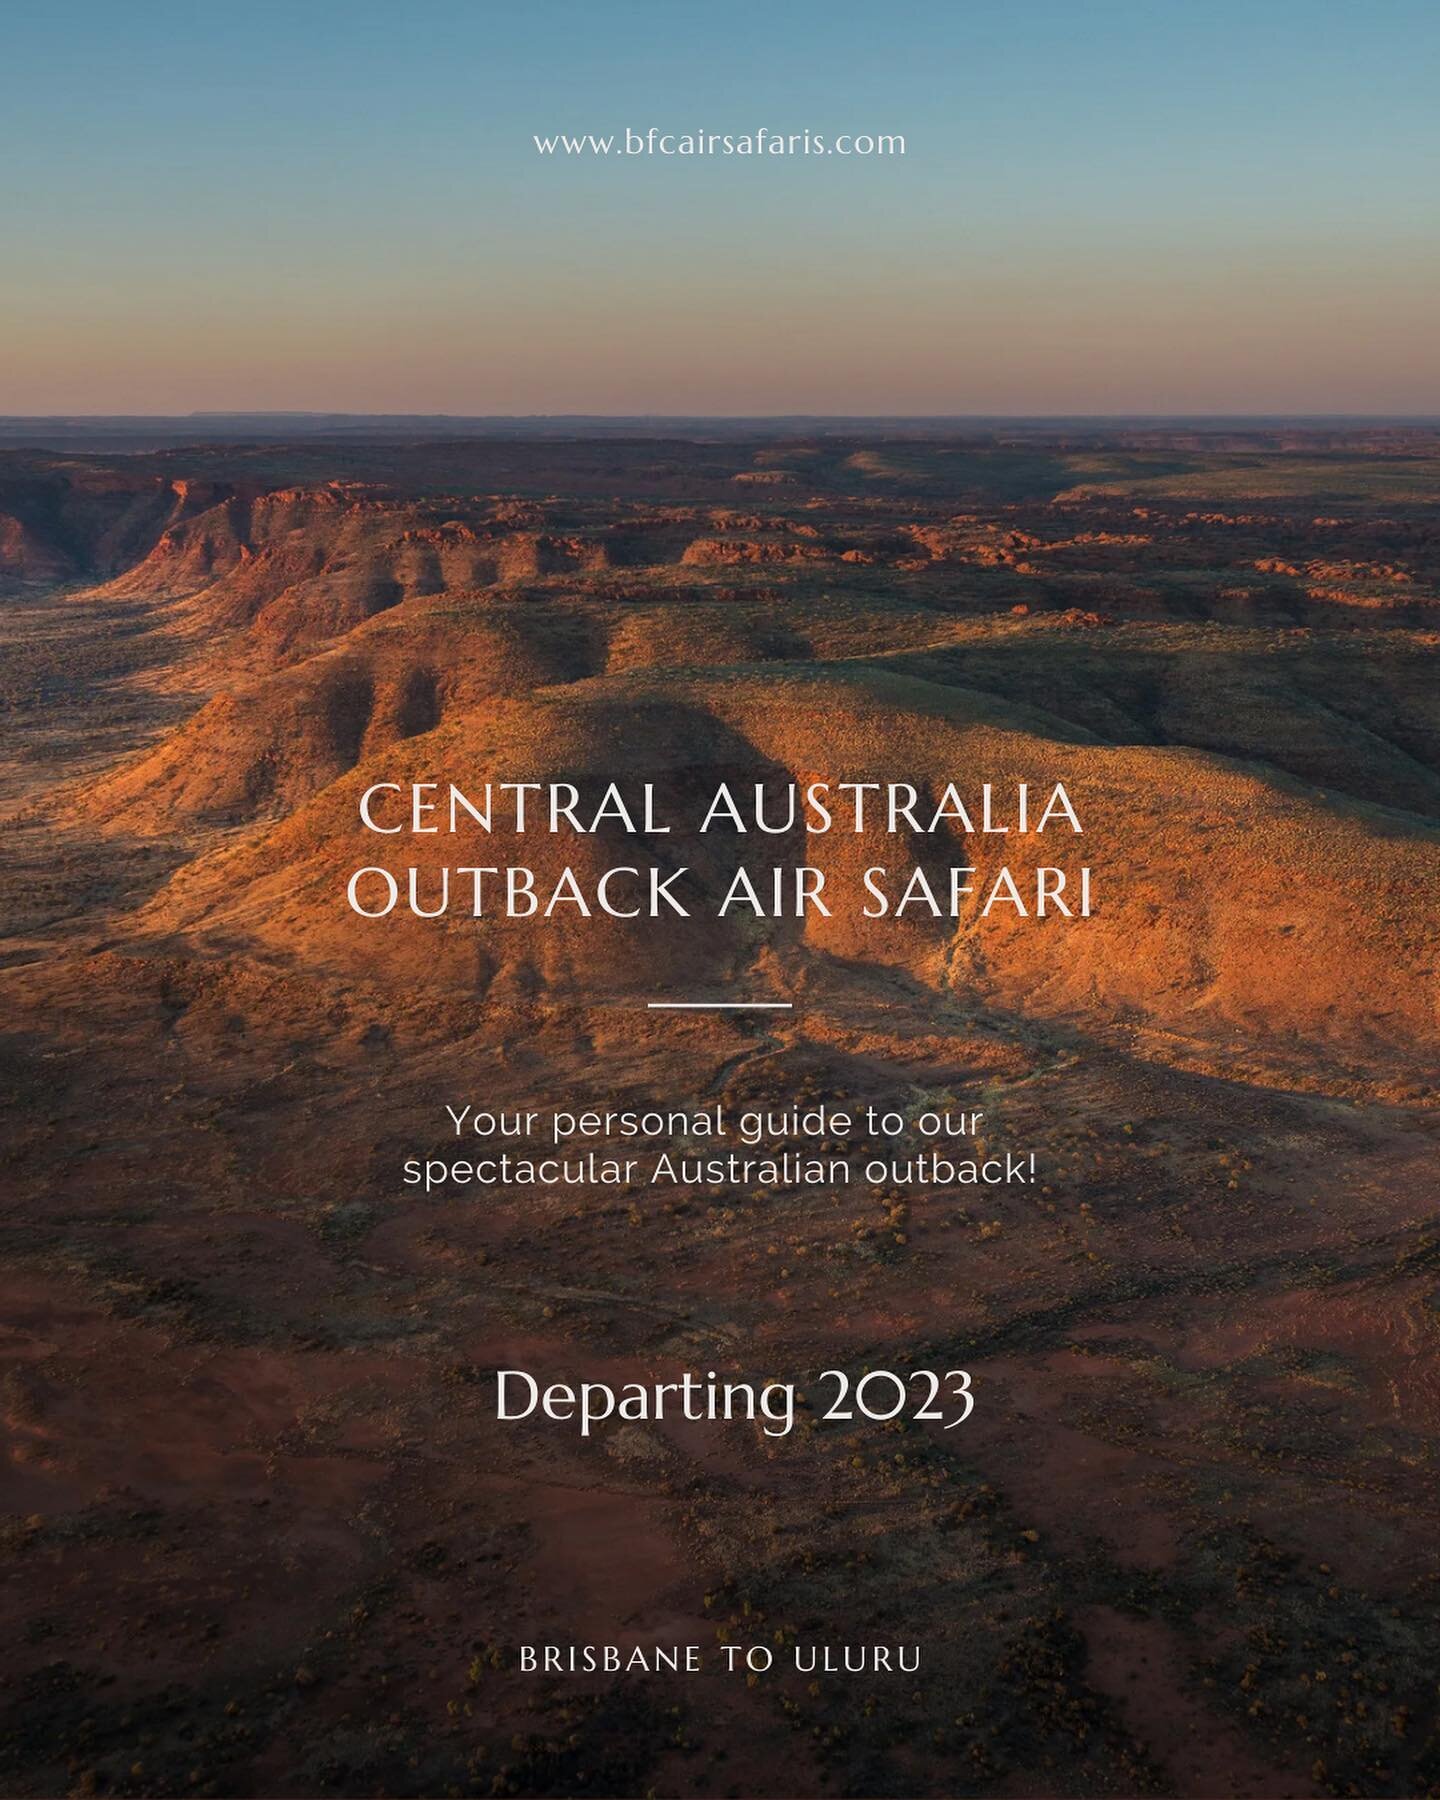 The first big announcement for the year! We have a new trip exploring the rich visual landscape of central Australia. These two tours are already almost sold out from our flight club mailing list, but there are a couple of spots left on the June 4th 